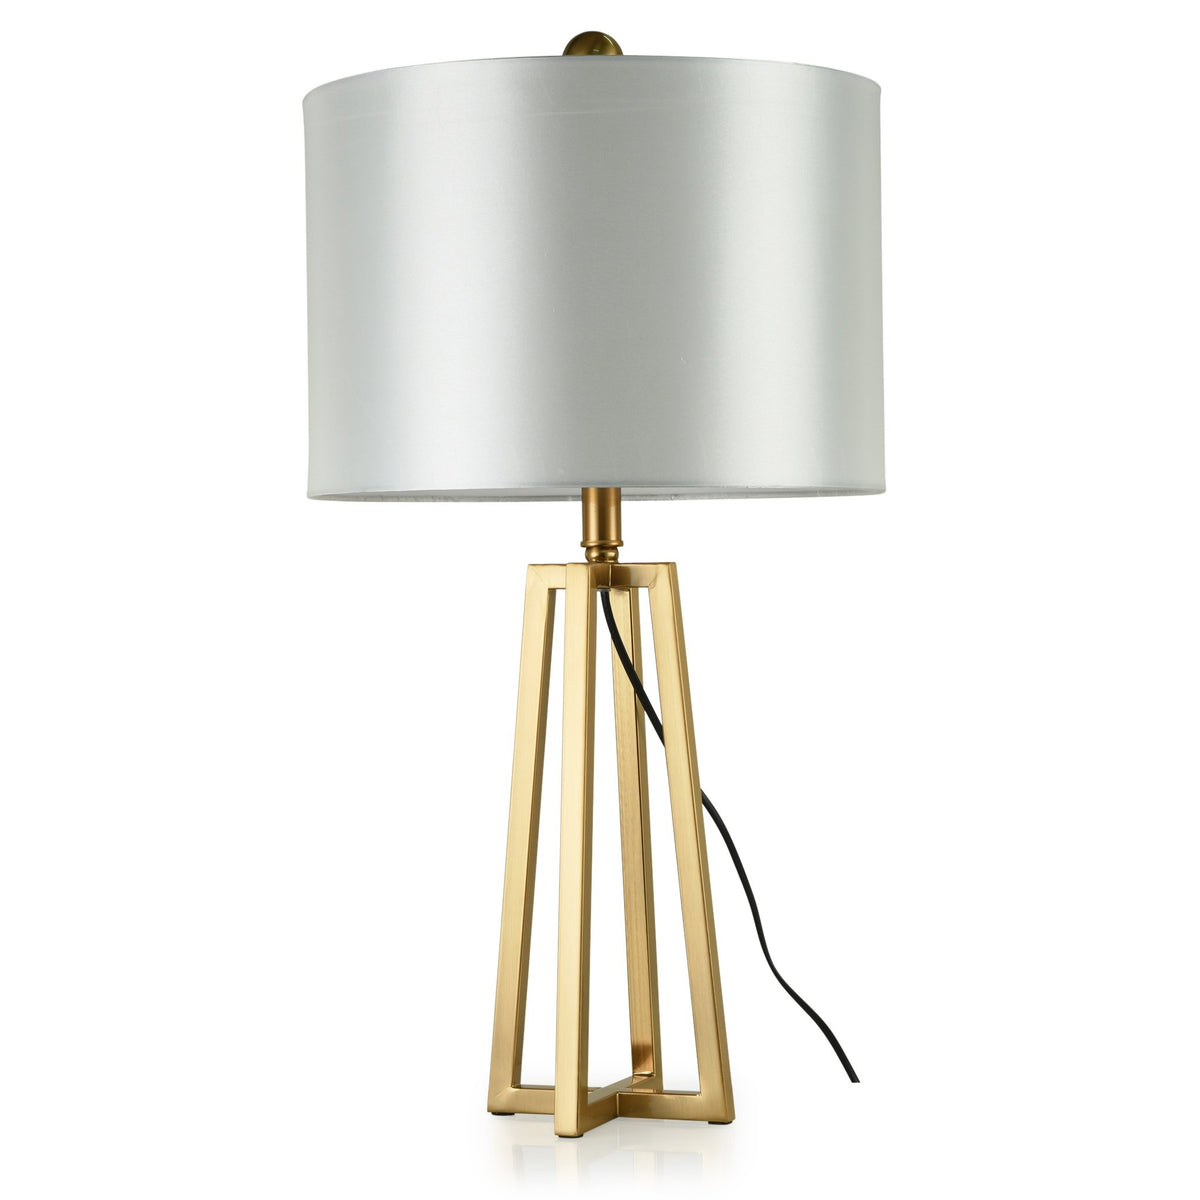 Fab Table Lamp Online